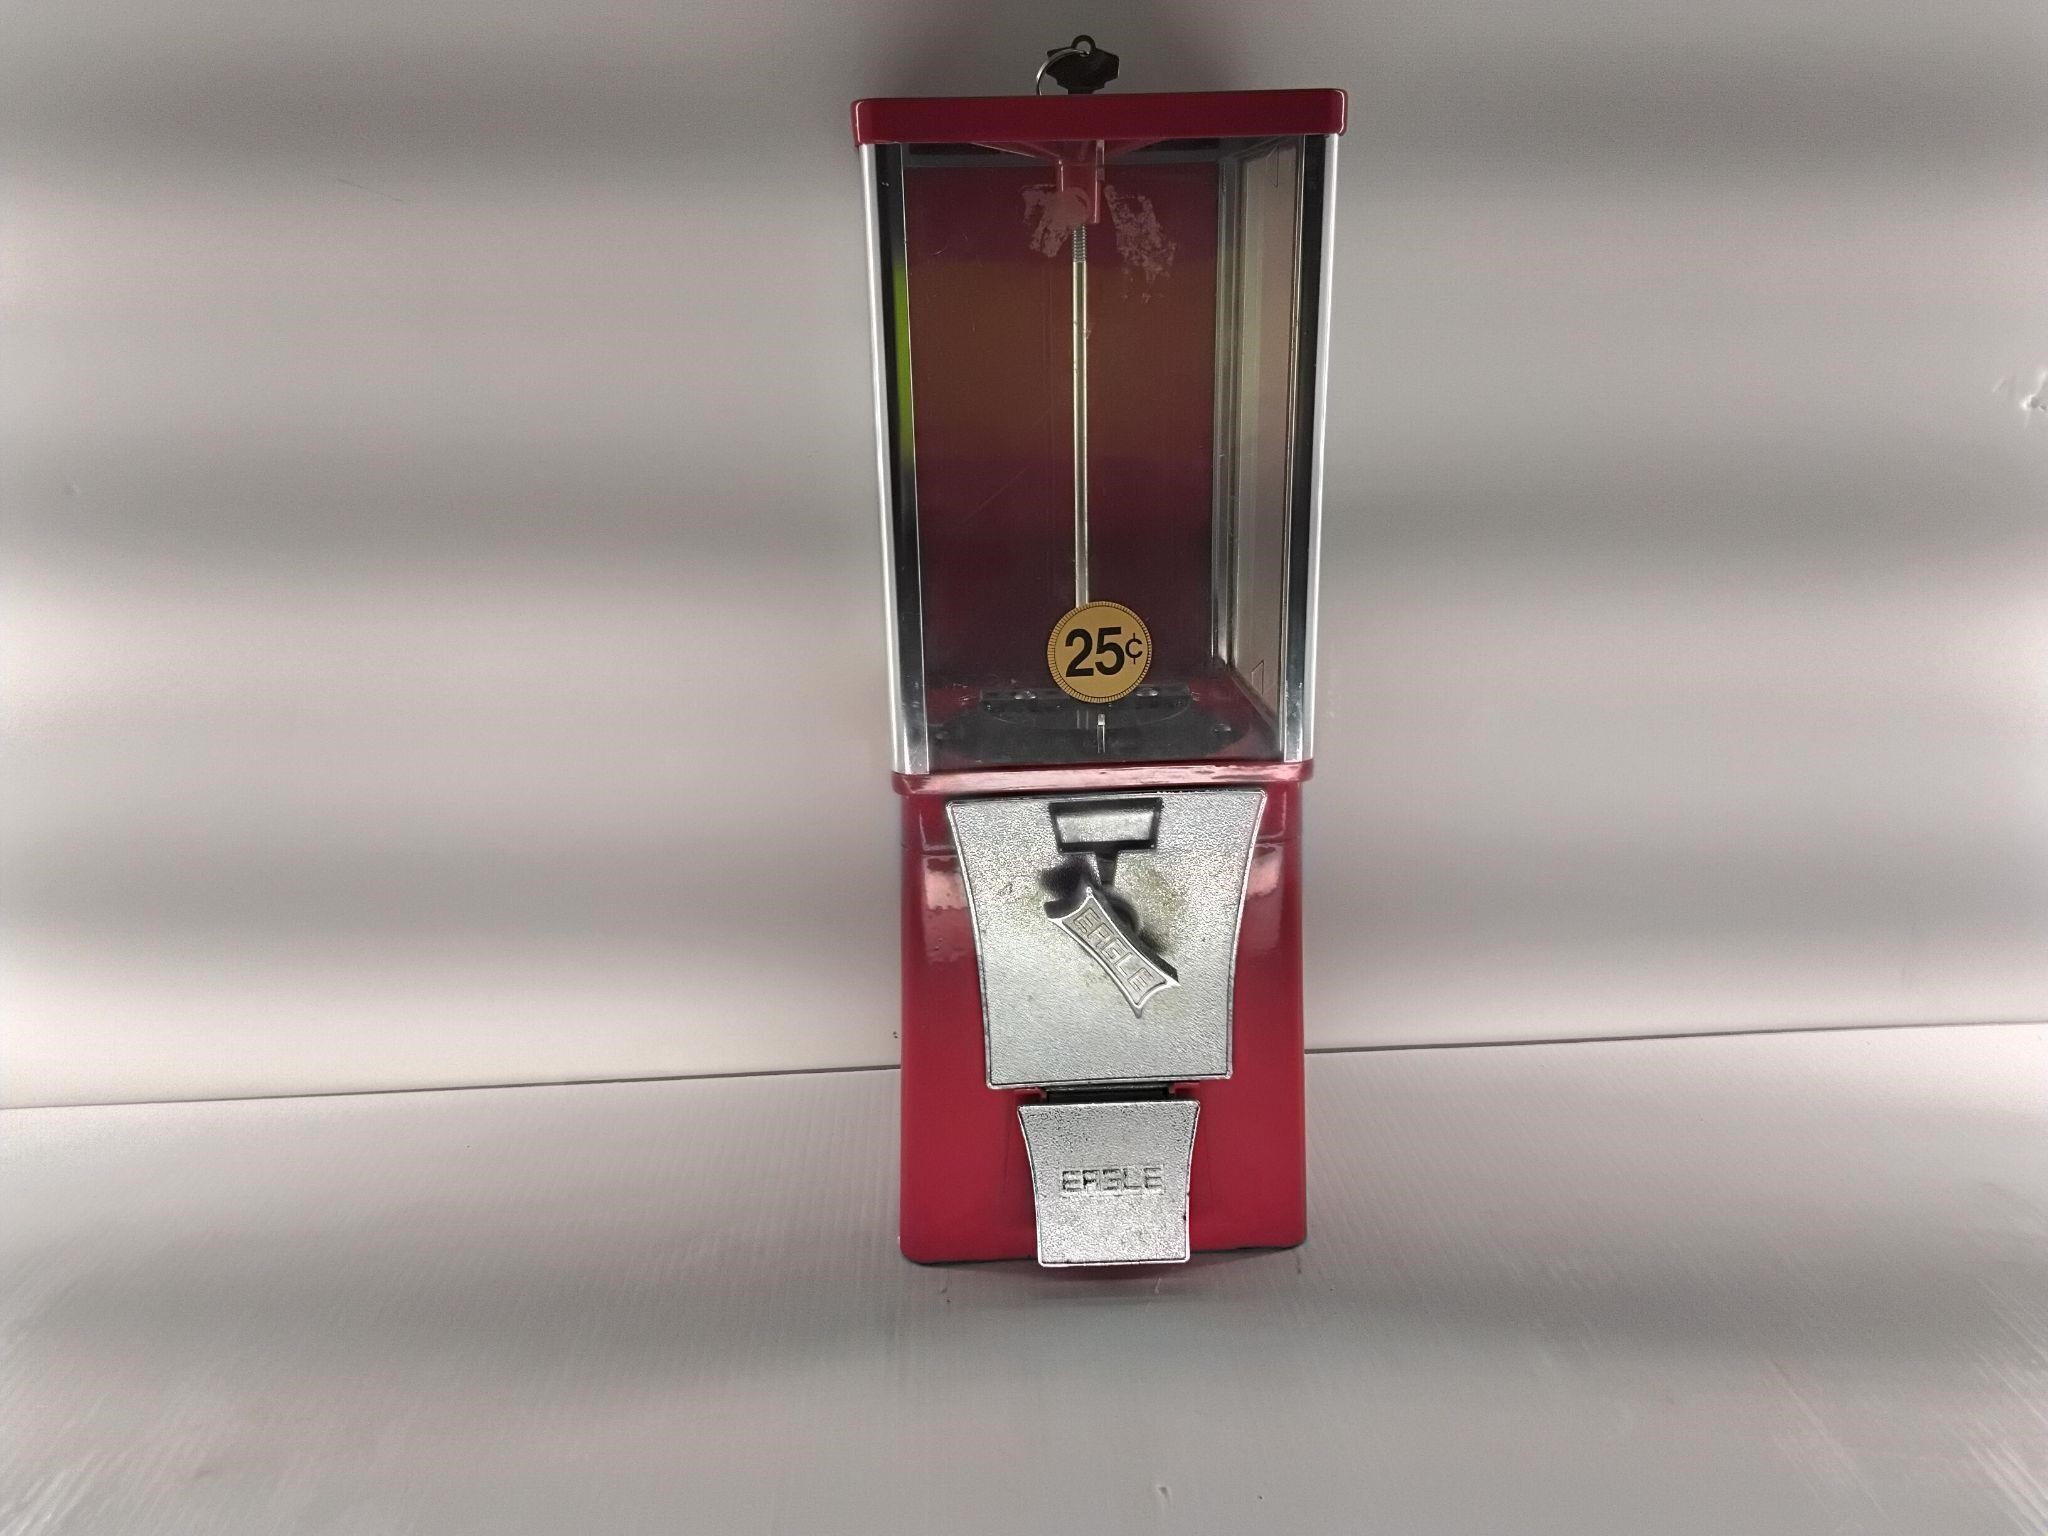 25 cent gumball machine with key